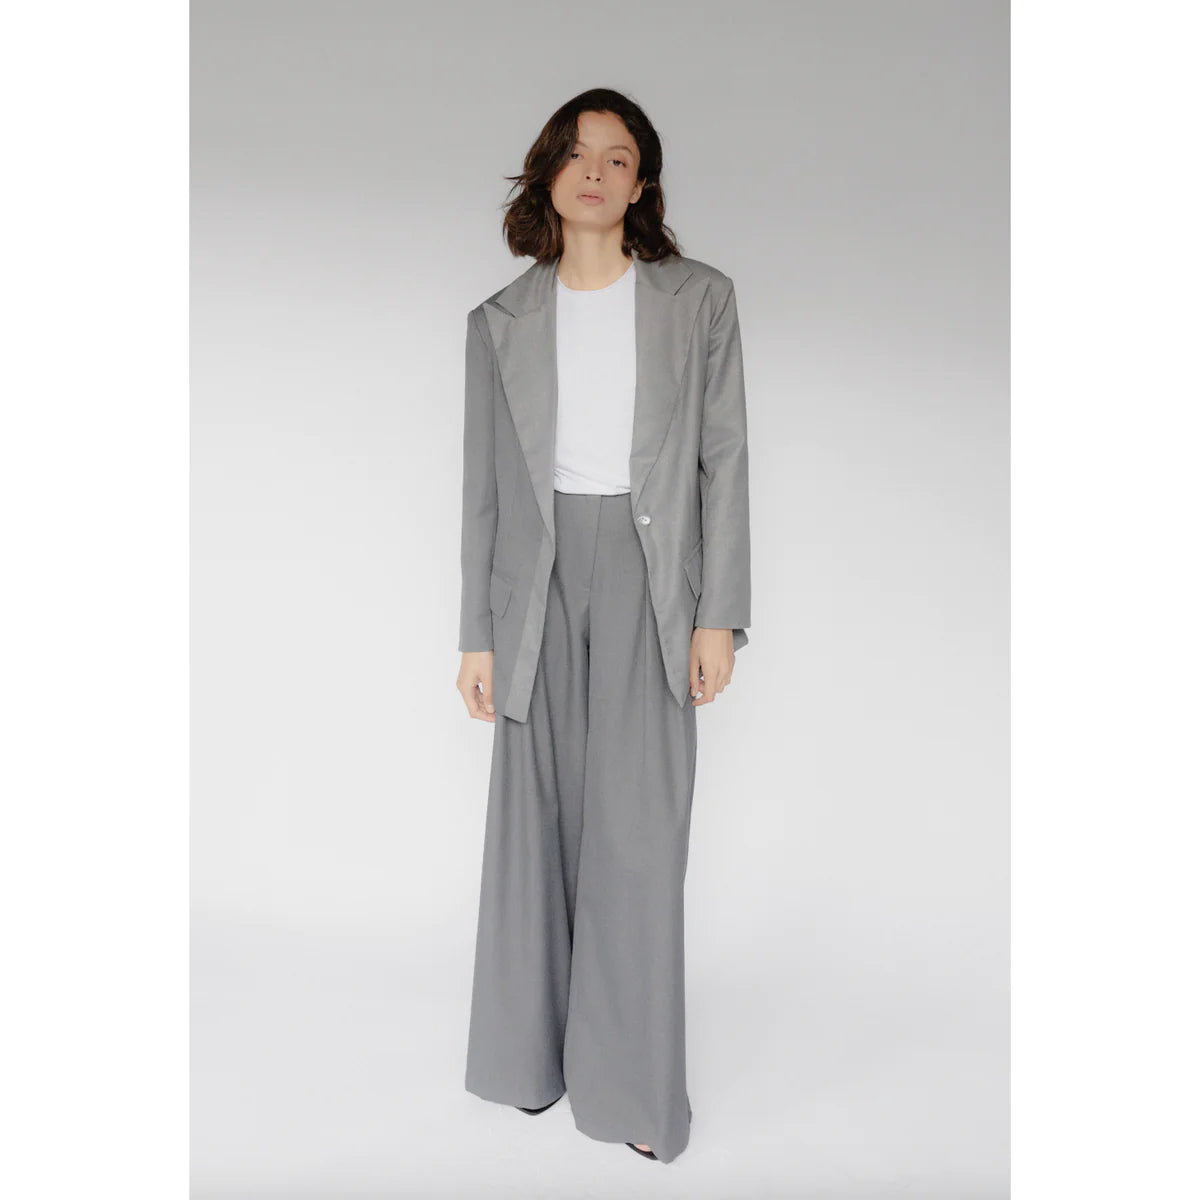 a girl wearing a suit on how to style pants